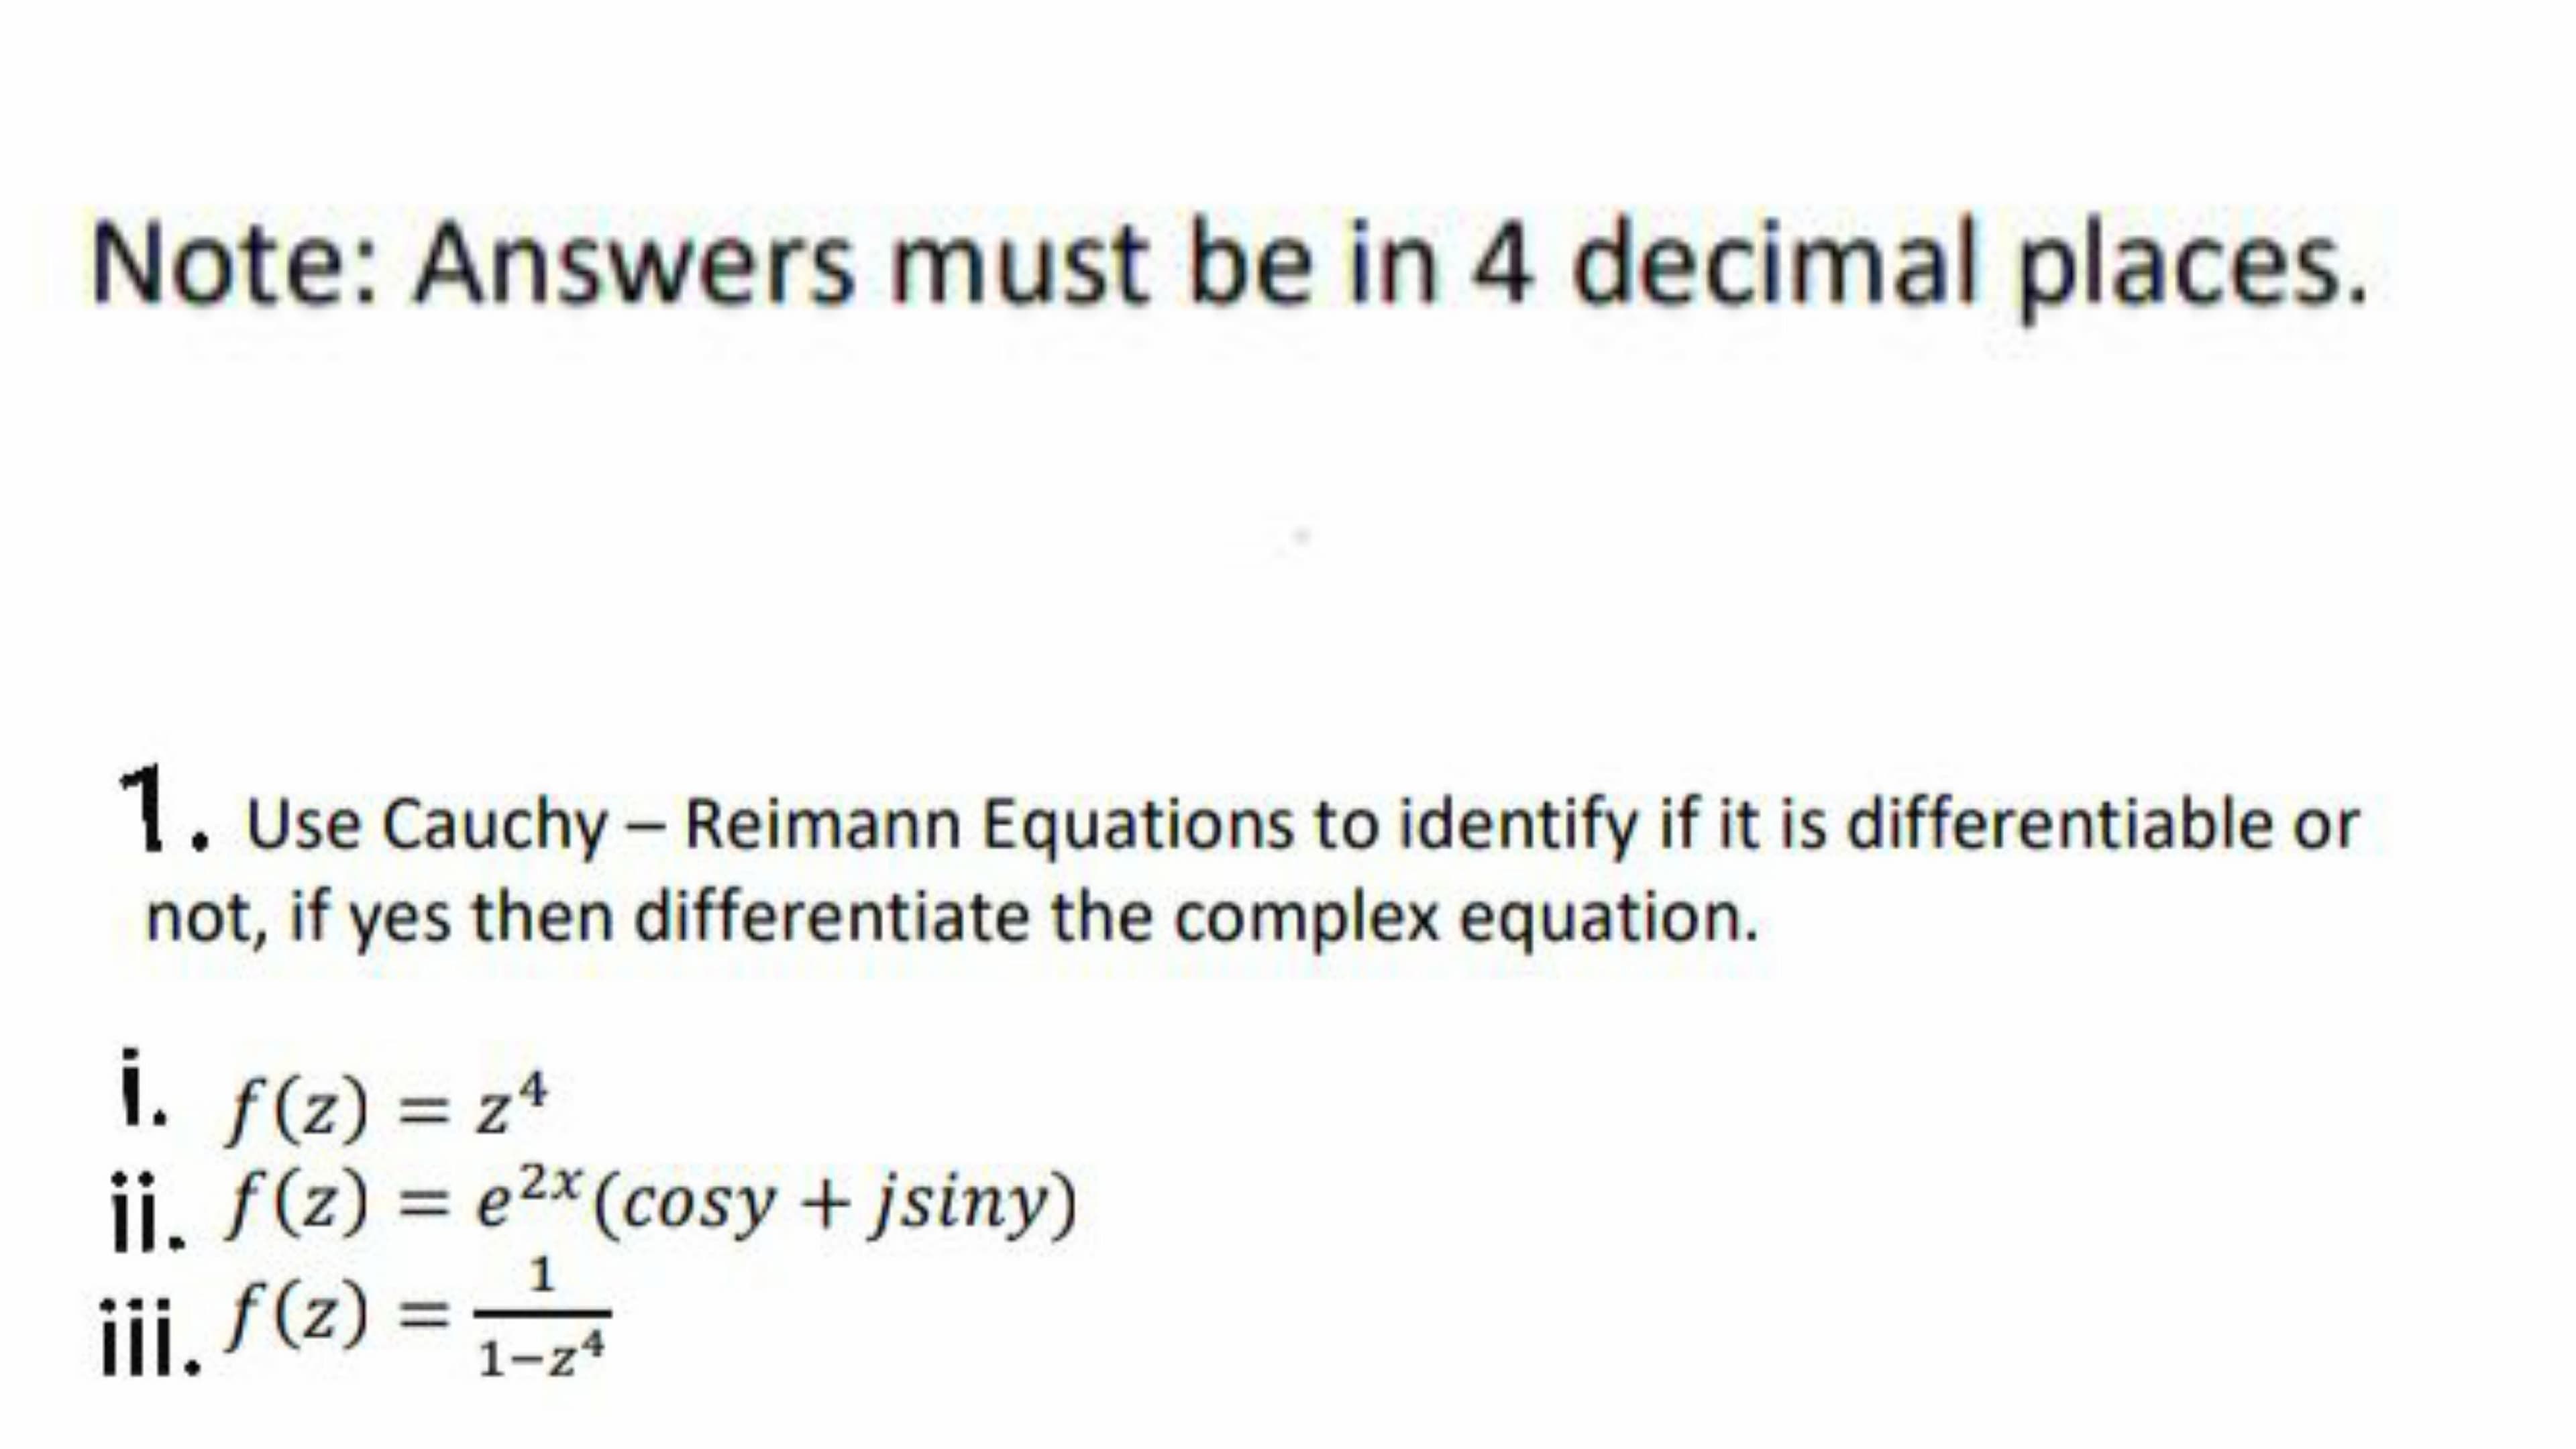 1. Use Cauchy - Reimann Equations to identify if it is differentiable or
not, if yes then differentiate the complex equation.
i.
f(z) = z4
